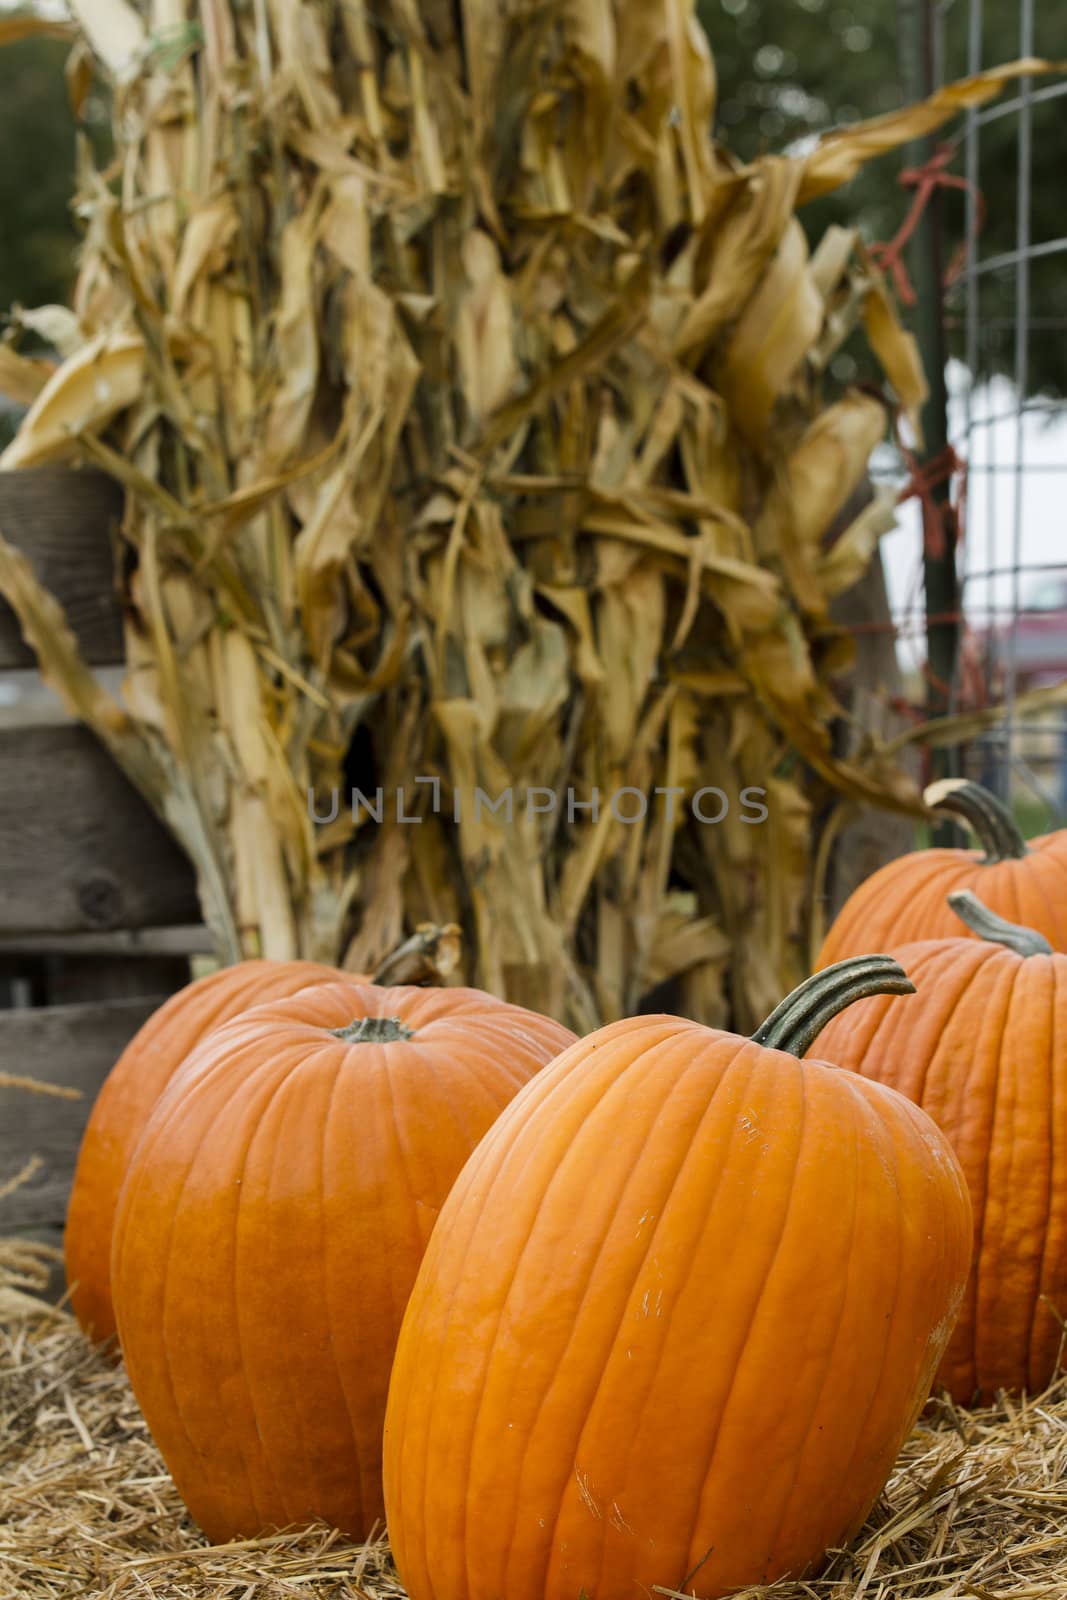 Large pumpkins on a bed of straw with corn stalks in the background